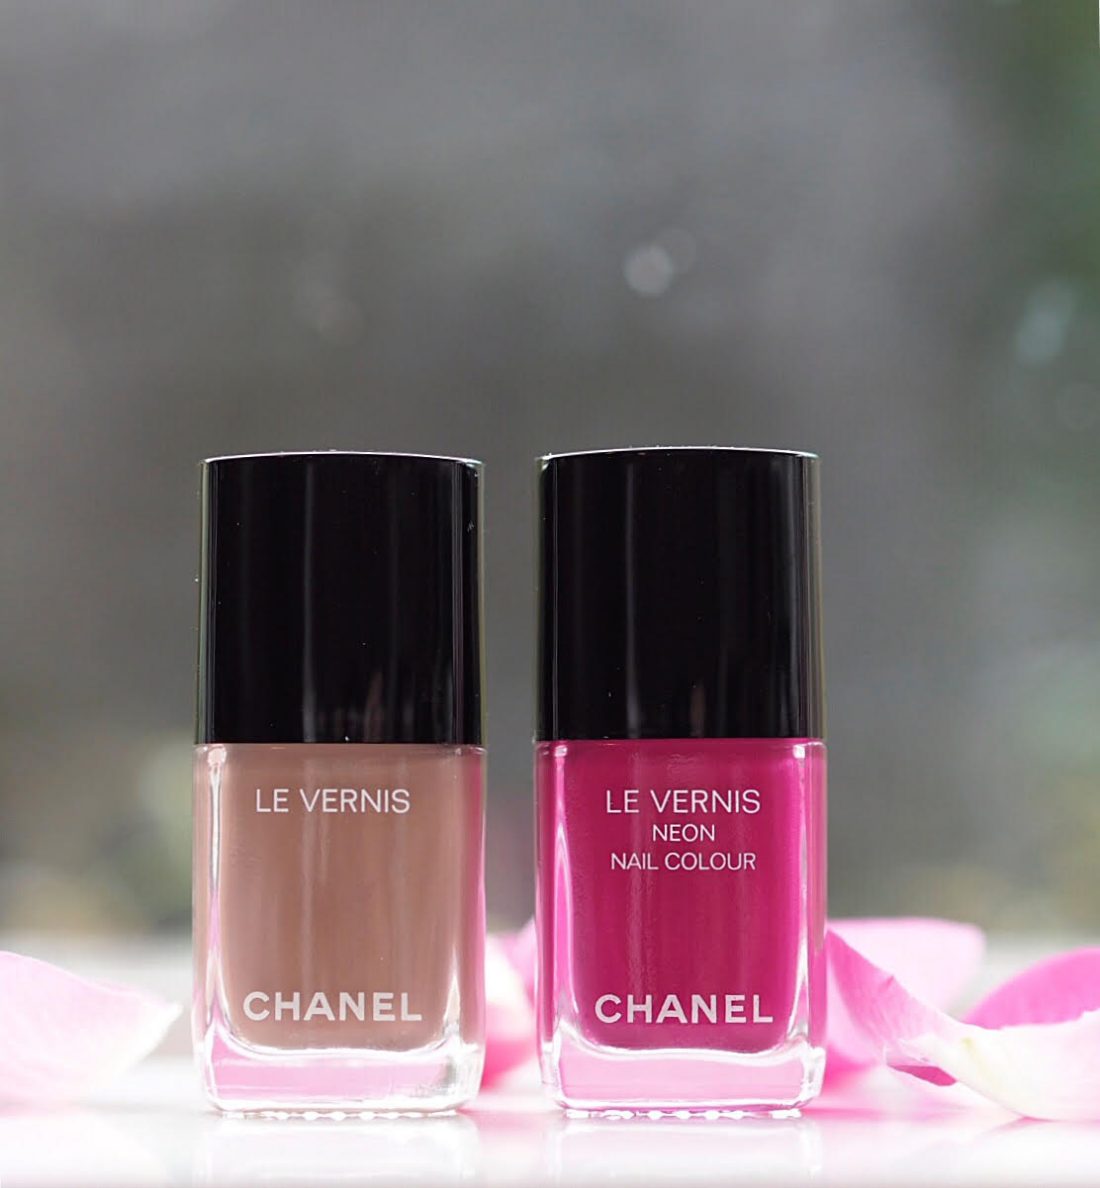 Chanel Spring Beauty 2019